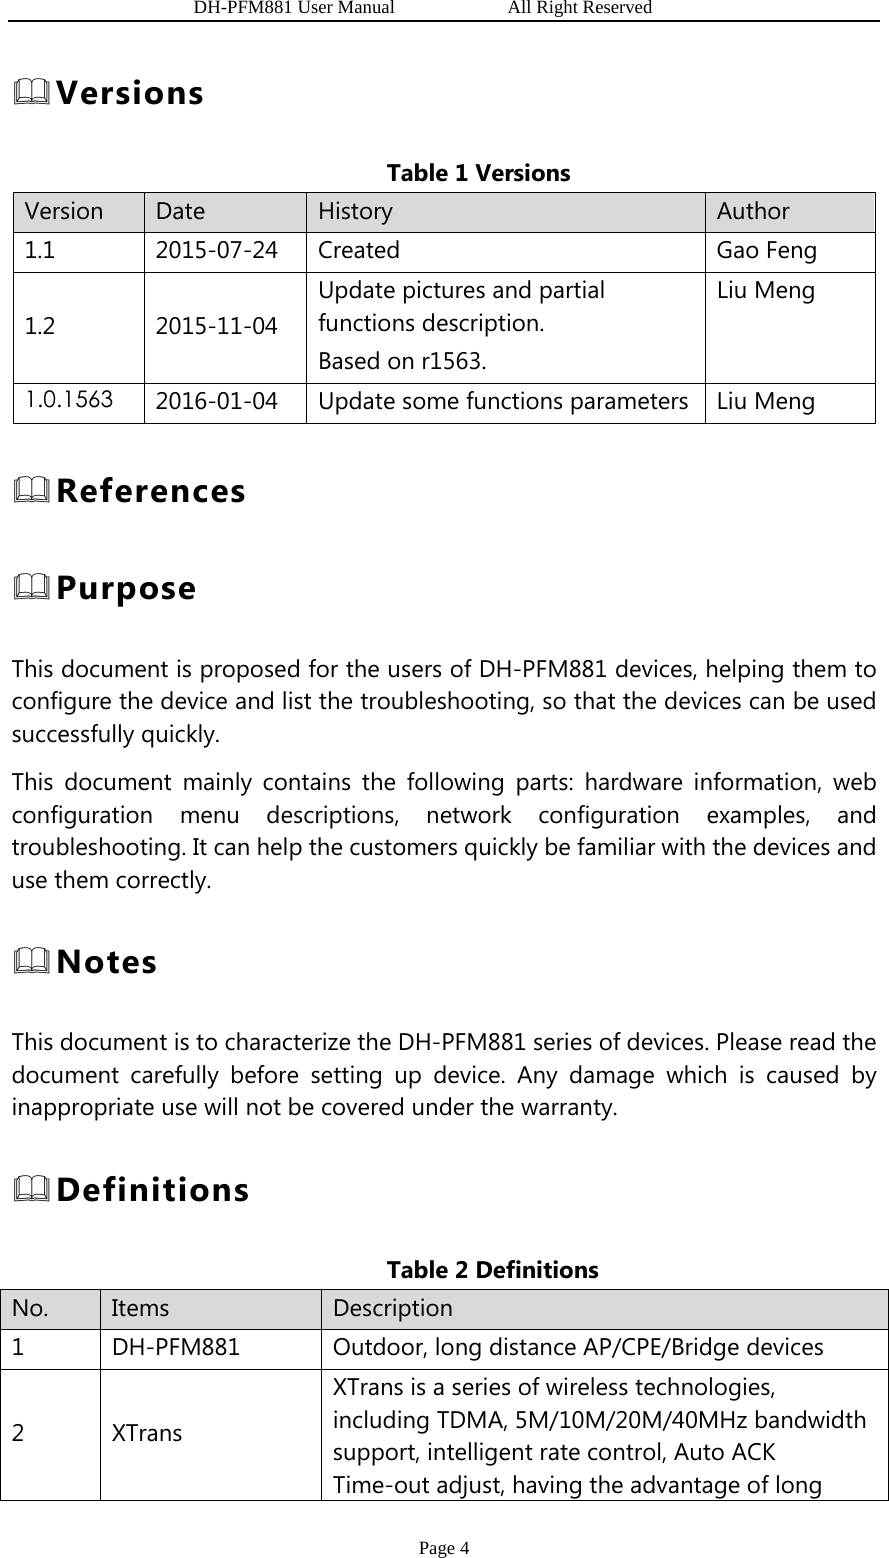                   DH-PFM881 User Manual            All Right Reserved Page 4  Versions Table 1 Versions Version  Date  History  Author 1.1 2015-07-24 Created  Gao Feng 1.2 2015-11-04 Update pictures and partial functions description. Based on r1563. Liu Meng 1.0.1563 2016-01-04  Update some functions parameters Liu Meng  References  Purpose This document is proposed for the users of DH-PFM881 devices, helping them to configure the device and list the troubleshooting, so that the devices can be used successfully quickly. This document mainly contains the following parts: hardware information, web configuration menu descriptions, network configuration examples, and troubleshooting. It can help the customers quickly be familiar with the devices and use them correctly.  Notes This document is to characterize the DH-PFM881 series of devices. Please read the document carefully before setting up device. Any damage which is caused by inappropriate use will not be covered under the warranty.  Definitions Table 2 Definitions   No.  Items  Description 1  DH-PFM881  Outdoor, long distance AP/CPE/Bridge devices 2 XTrans XTrans is a series of wireless technologies, including TDMA, 5M/10M/20M/40MHz bandwidth support, intelligent rate control, Auto ACK Time-out adjust, having the advantage of long 